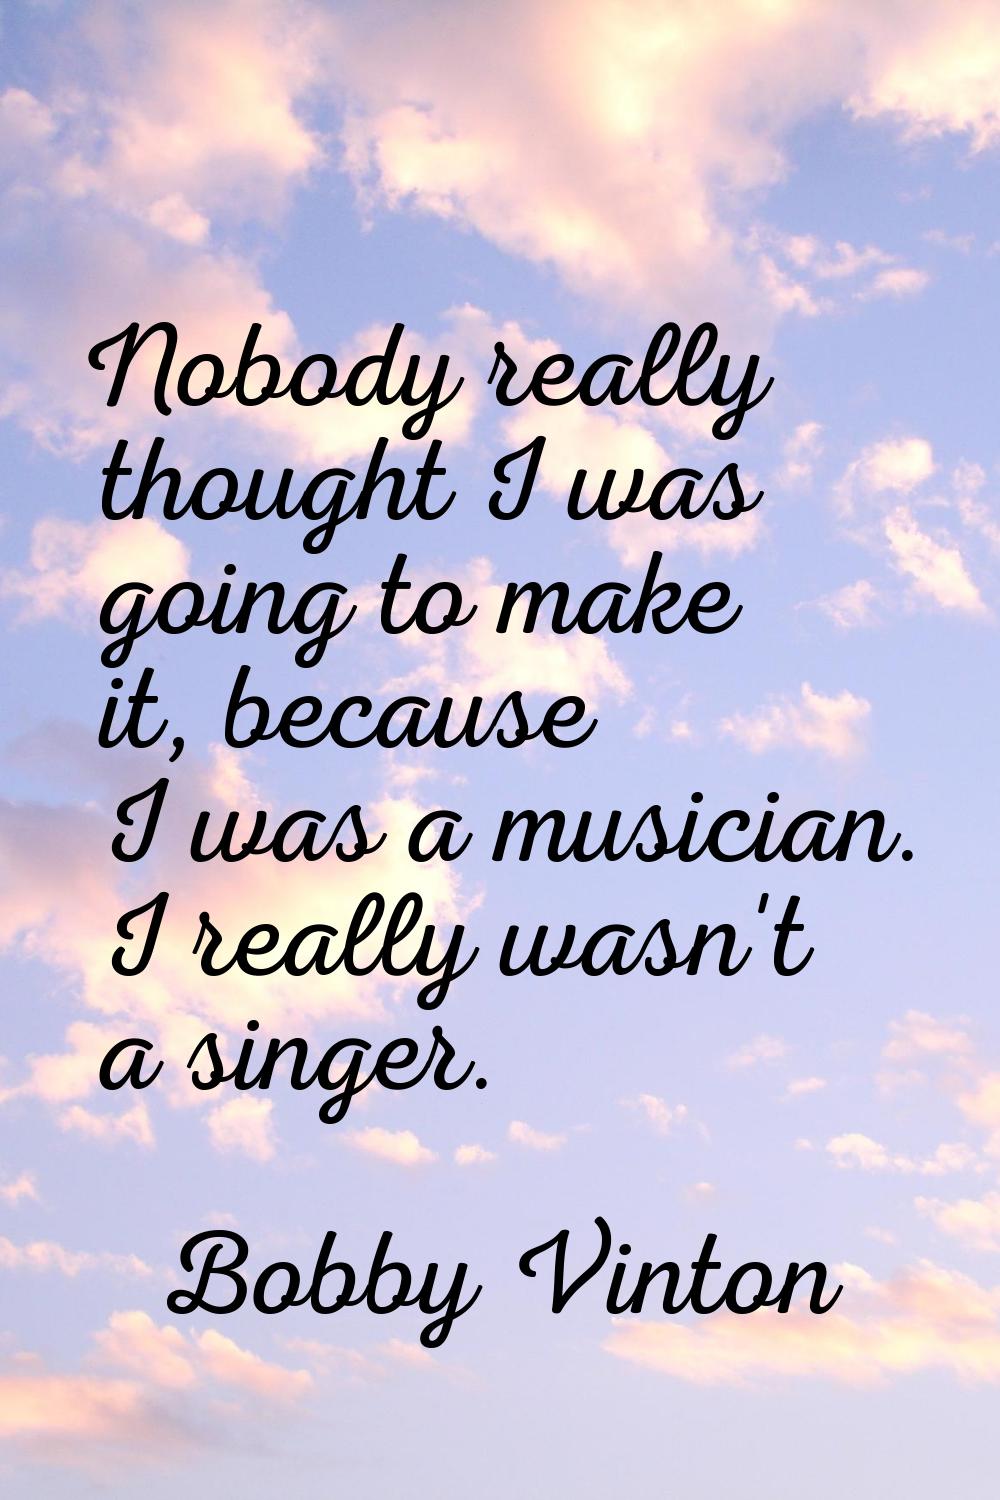 Nobody really thought I was going to make it, because I was a musician. I really wasn't a singer.